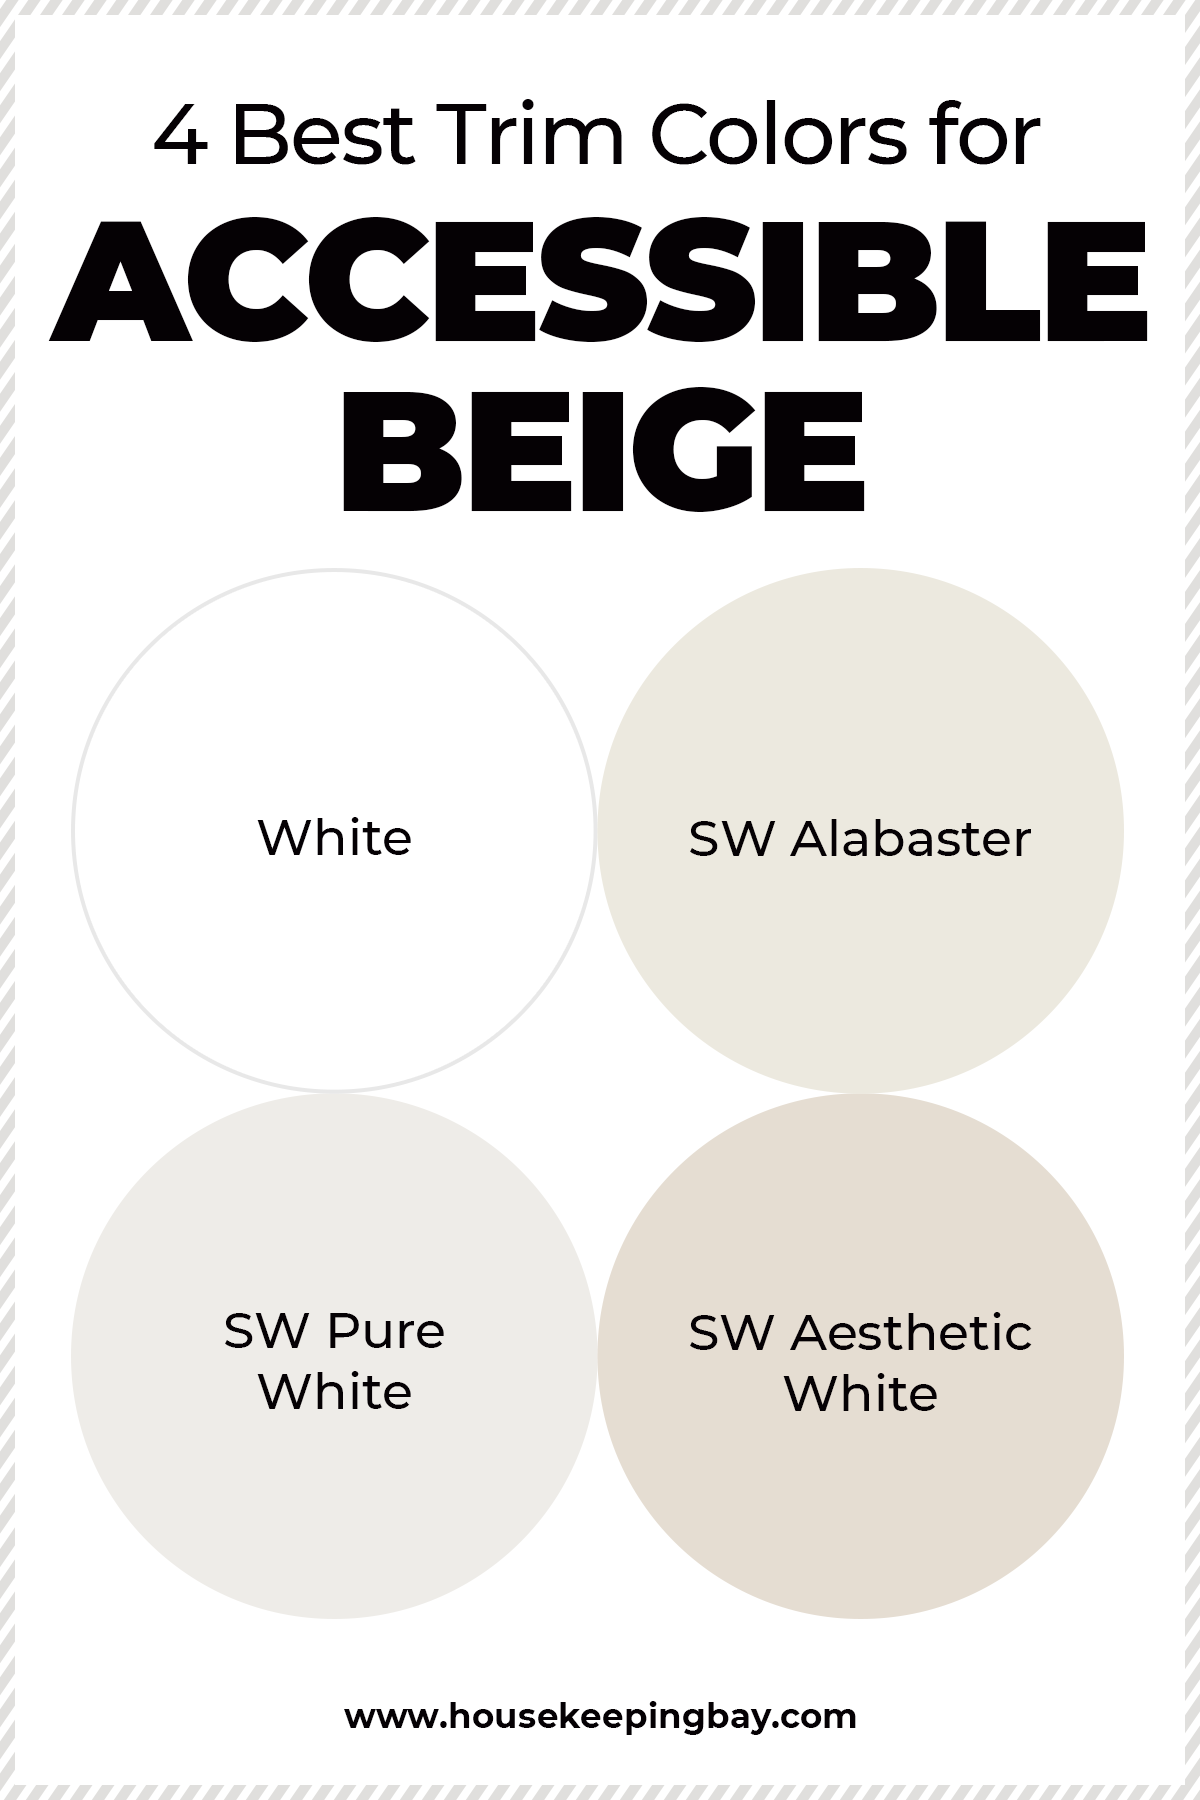 4 Best Trim Colors for Accessible Beige